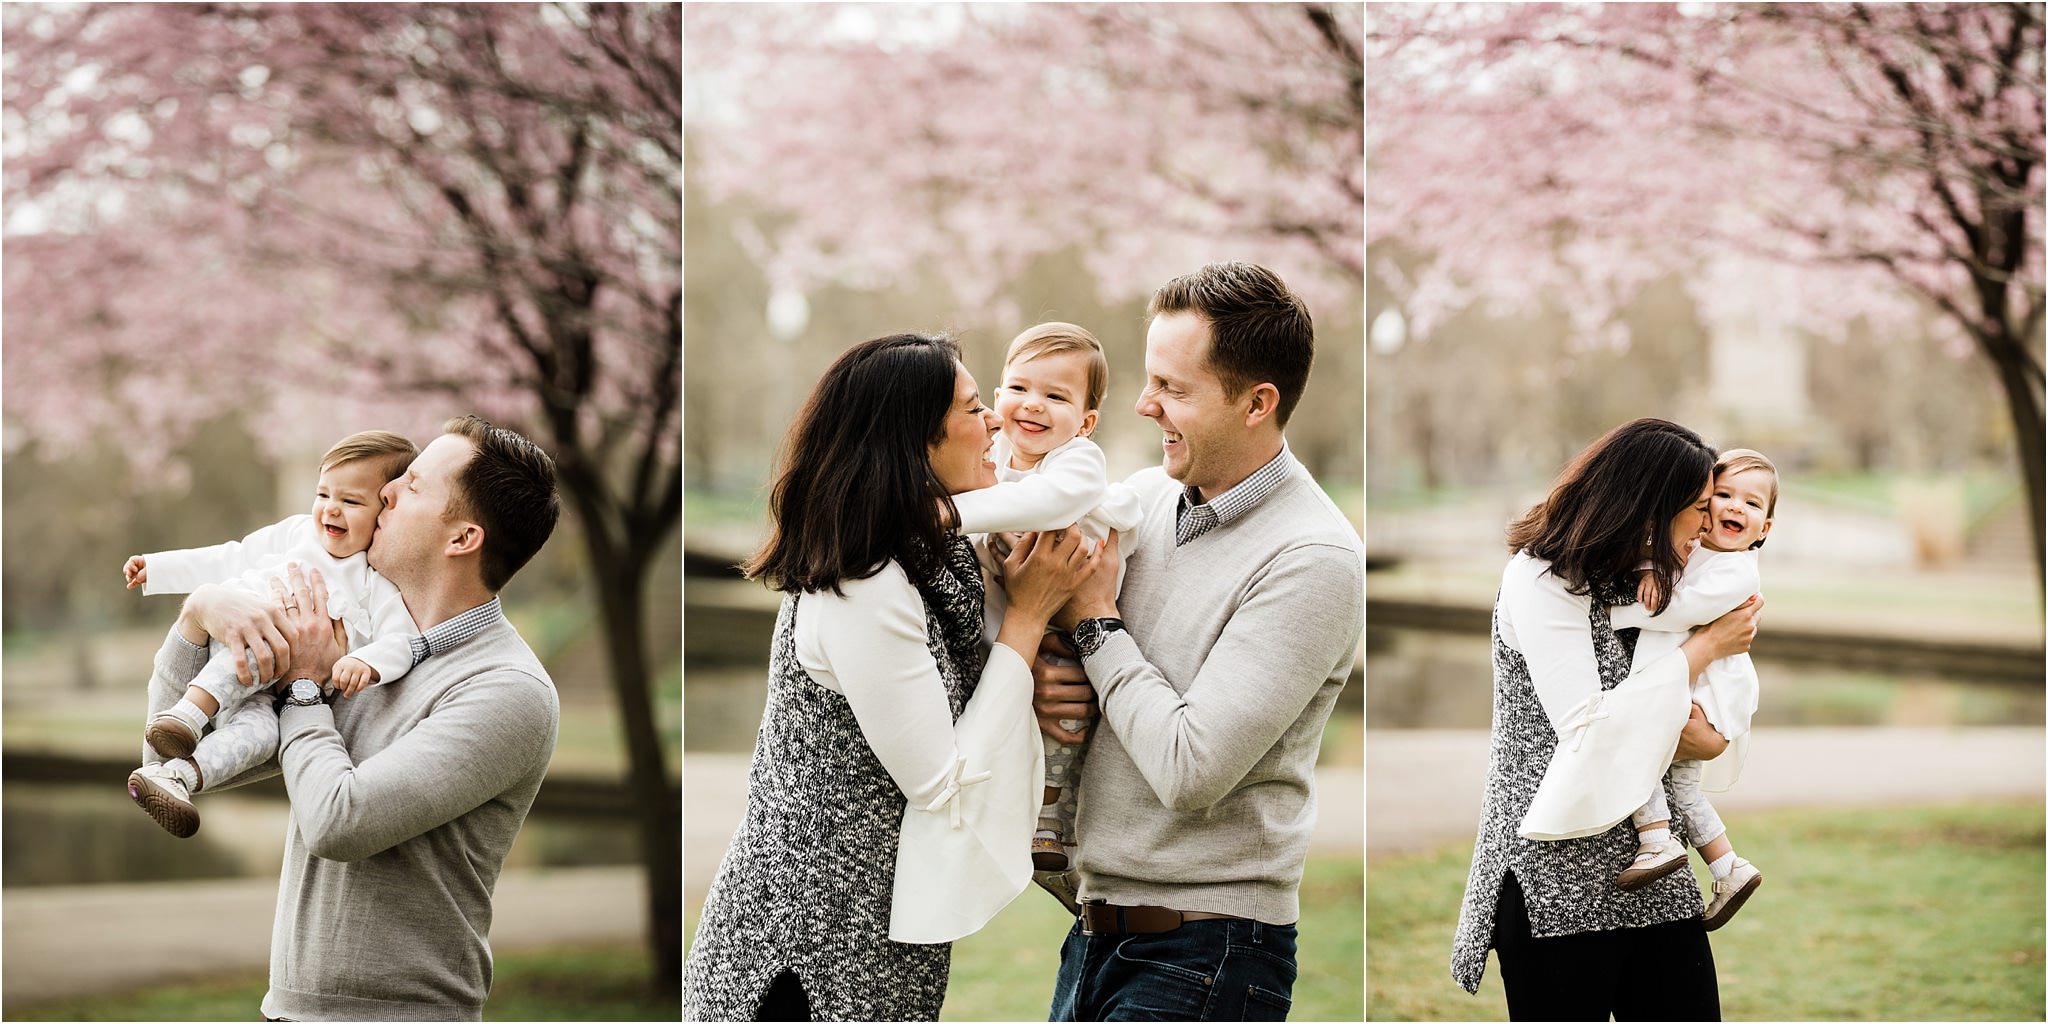 Spring Family photos at West Park in Pittsburgh